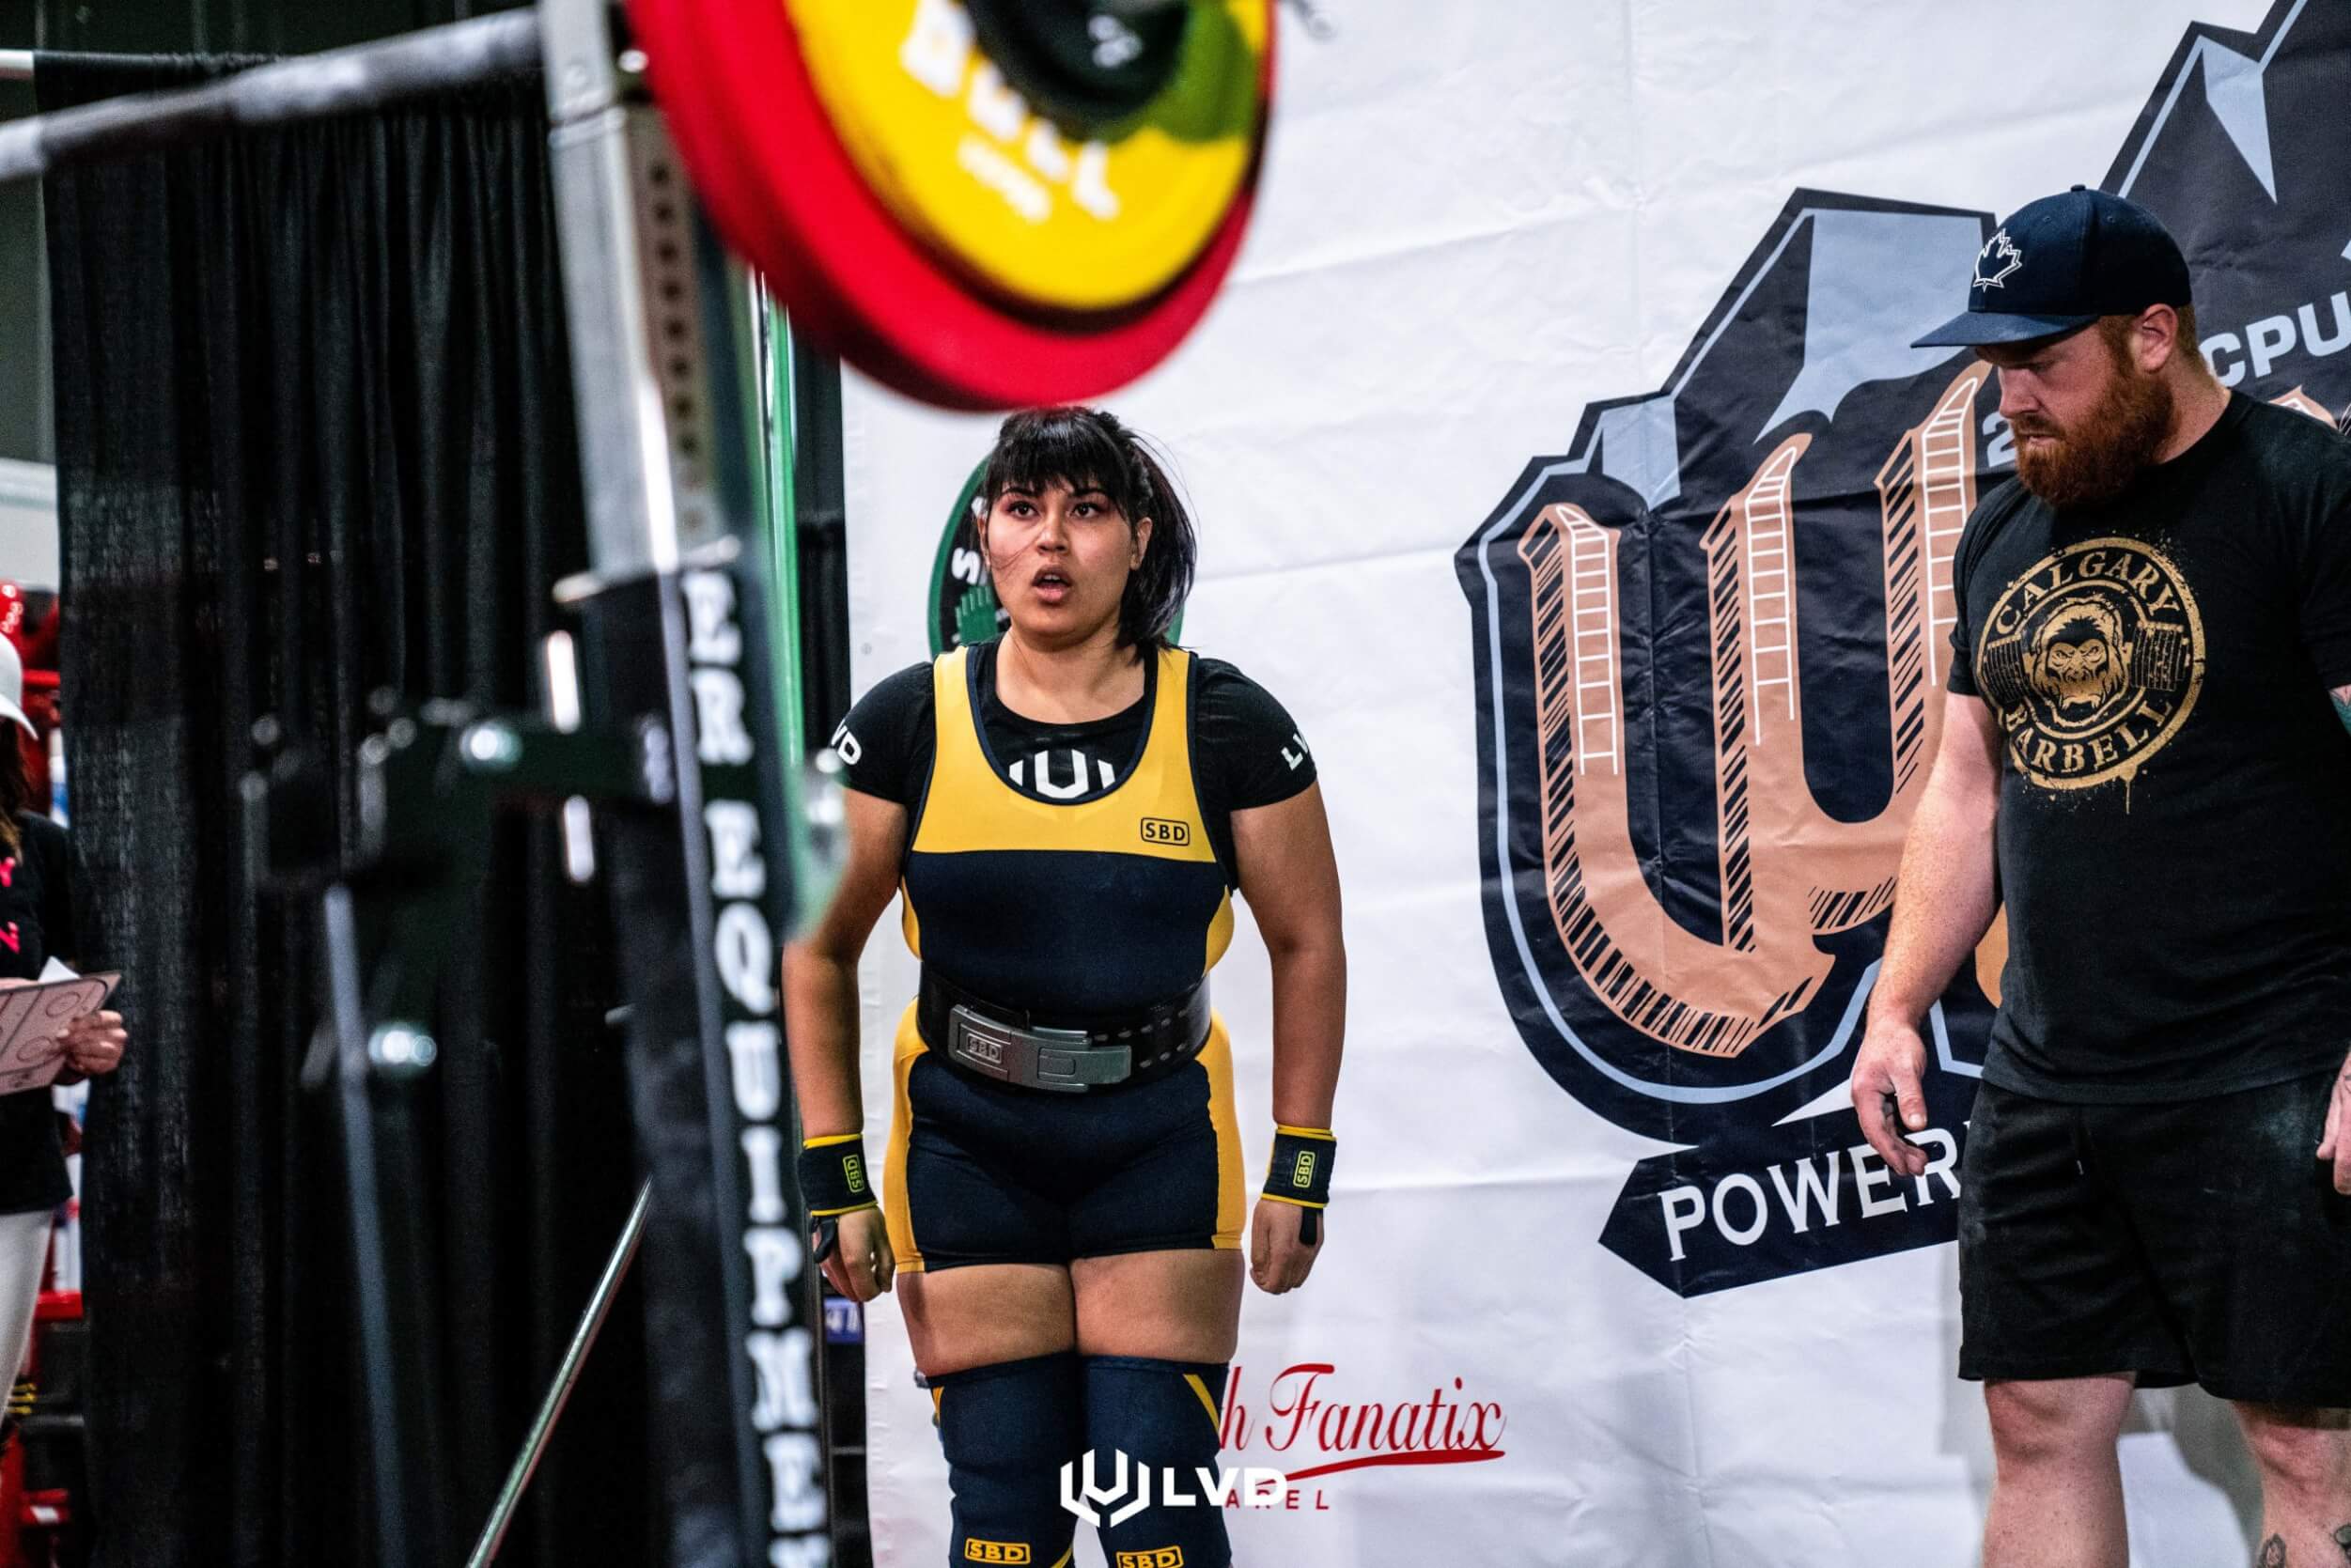 Aileen at a powerlifting competition